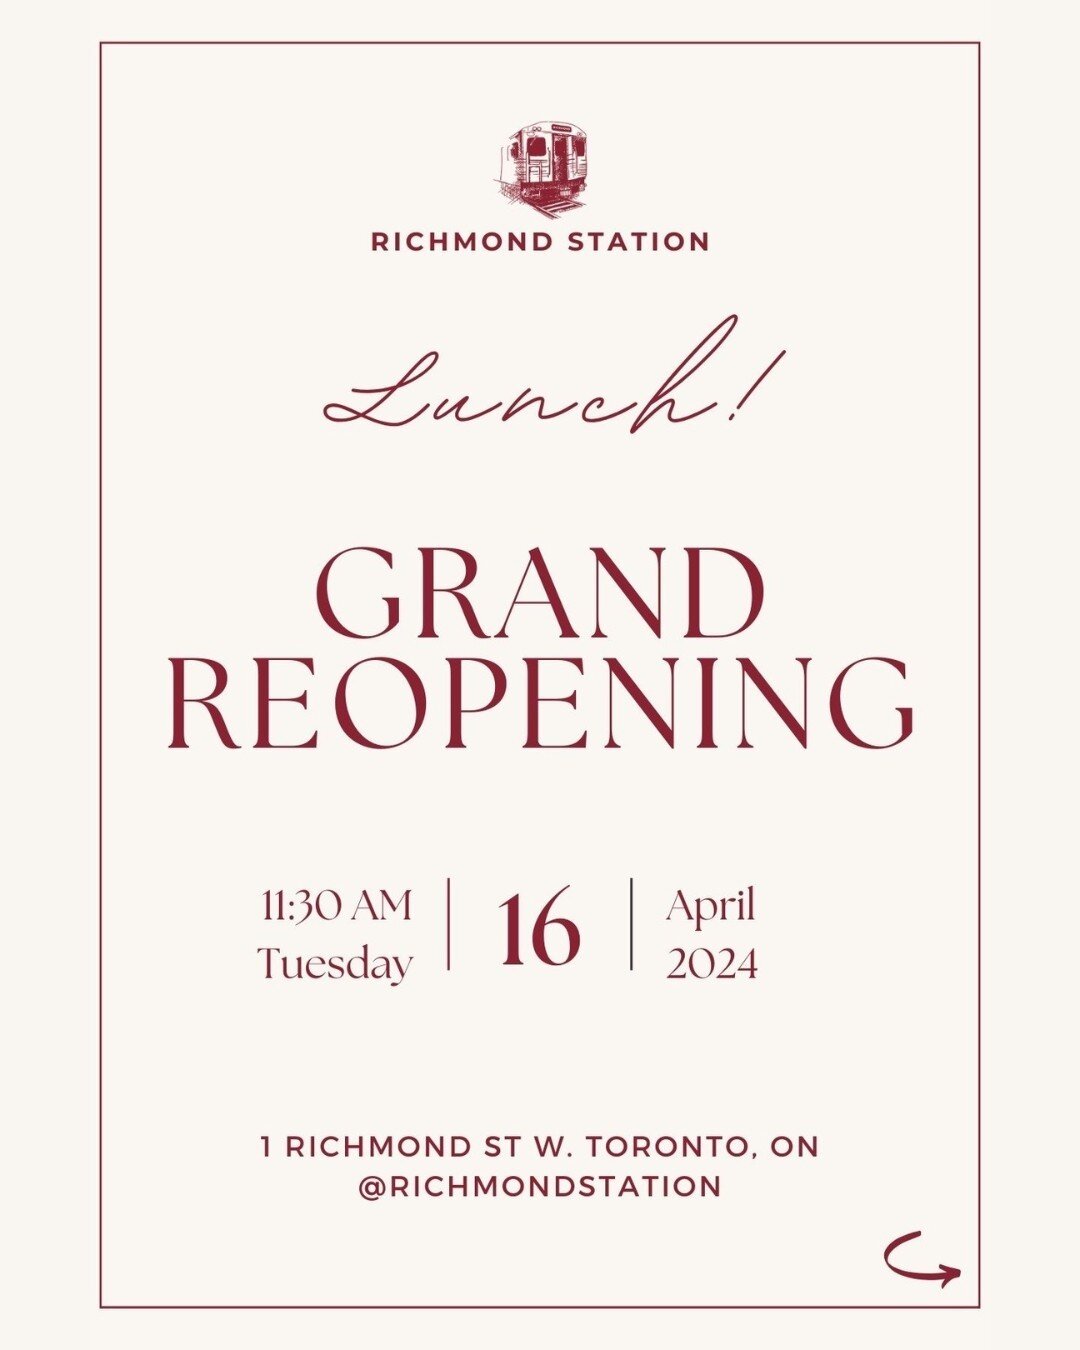 𝙍𝙞𝙘𝙝𝙢𝙤𝙣𝙙 𝙎𝙩𝙖𝙩𝙞𝙤𝙣 reopens for 𝙇𝙐𝙉𝘾𝙃 on Tuesday, April 16! 🍽️ 👨&zwj;🍳 Co-owned by a Top Chef Canada winner, this hidden gem is always serving new seasonal dishes with great ingredients from local farmers. 👩&zwj;🌾 🥗 🍔⁠
⁠
Want 